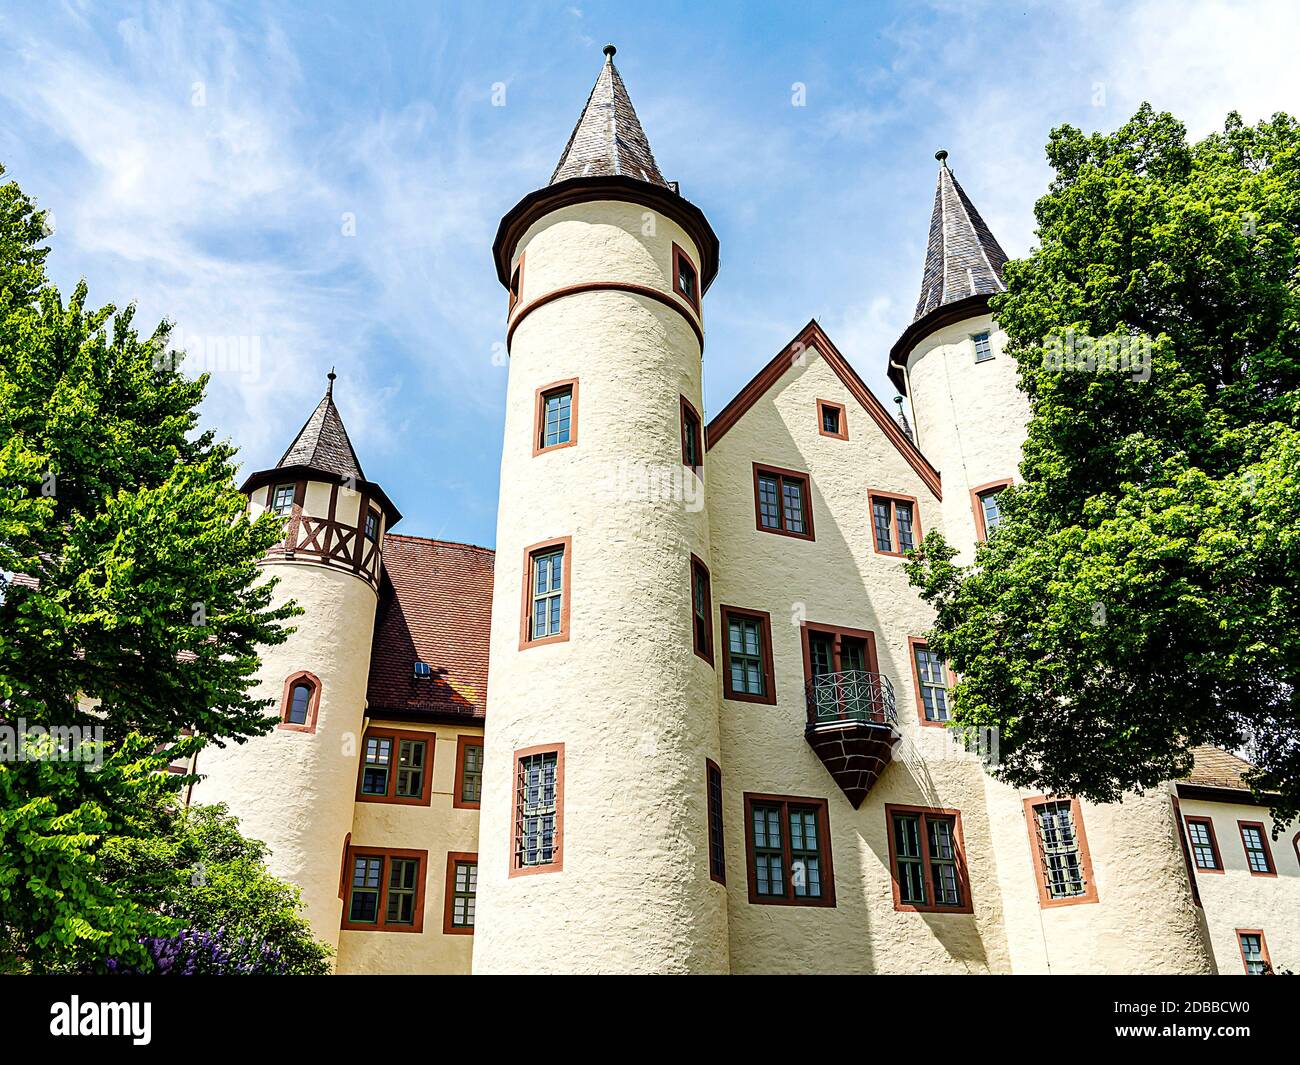 The medieval Lohrer Schloss, also called Kurmainzer Schloss, is a listed palace complex in the Lower Franconian town of Lohr am Main in Bavaria, Germany Stock Photo